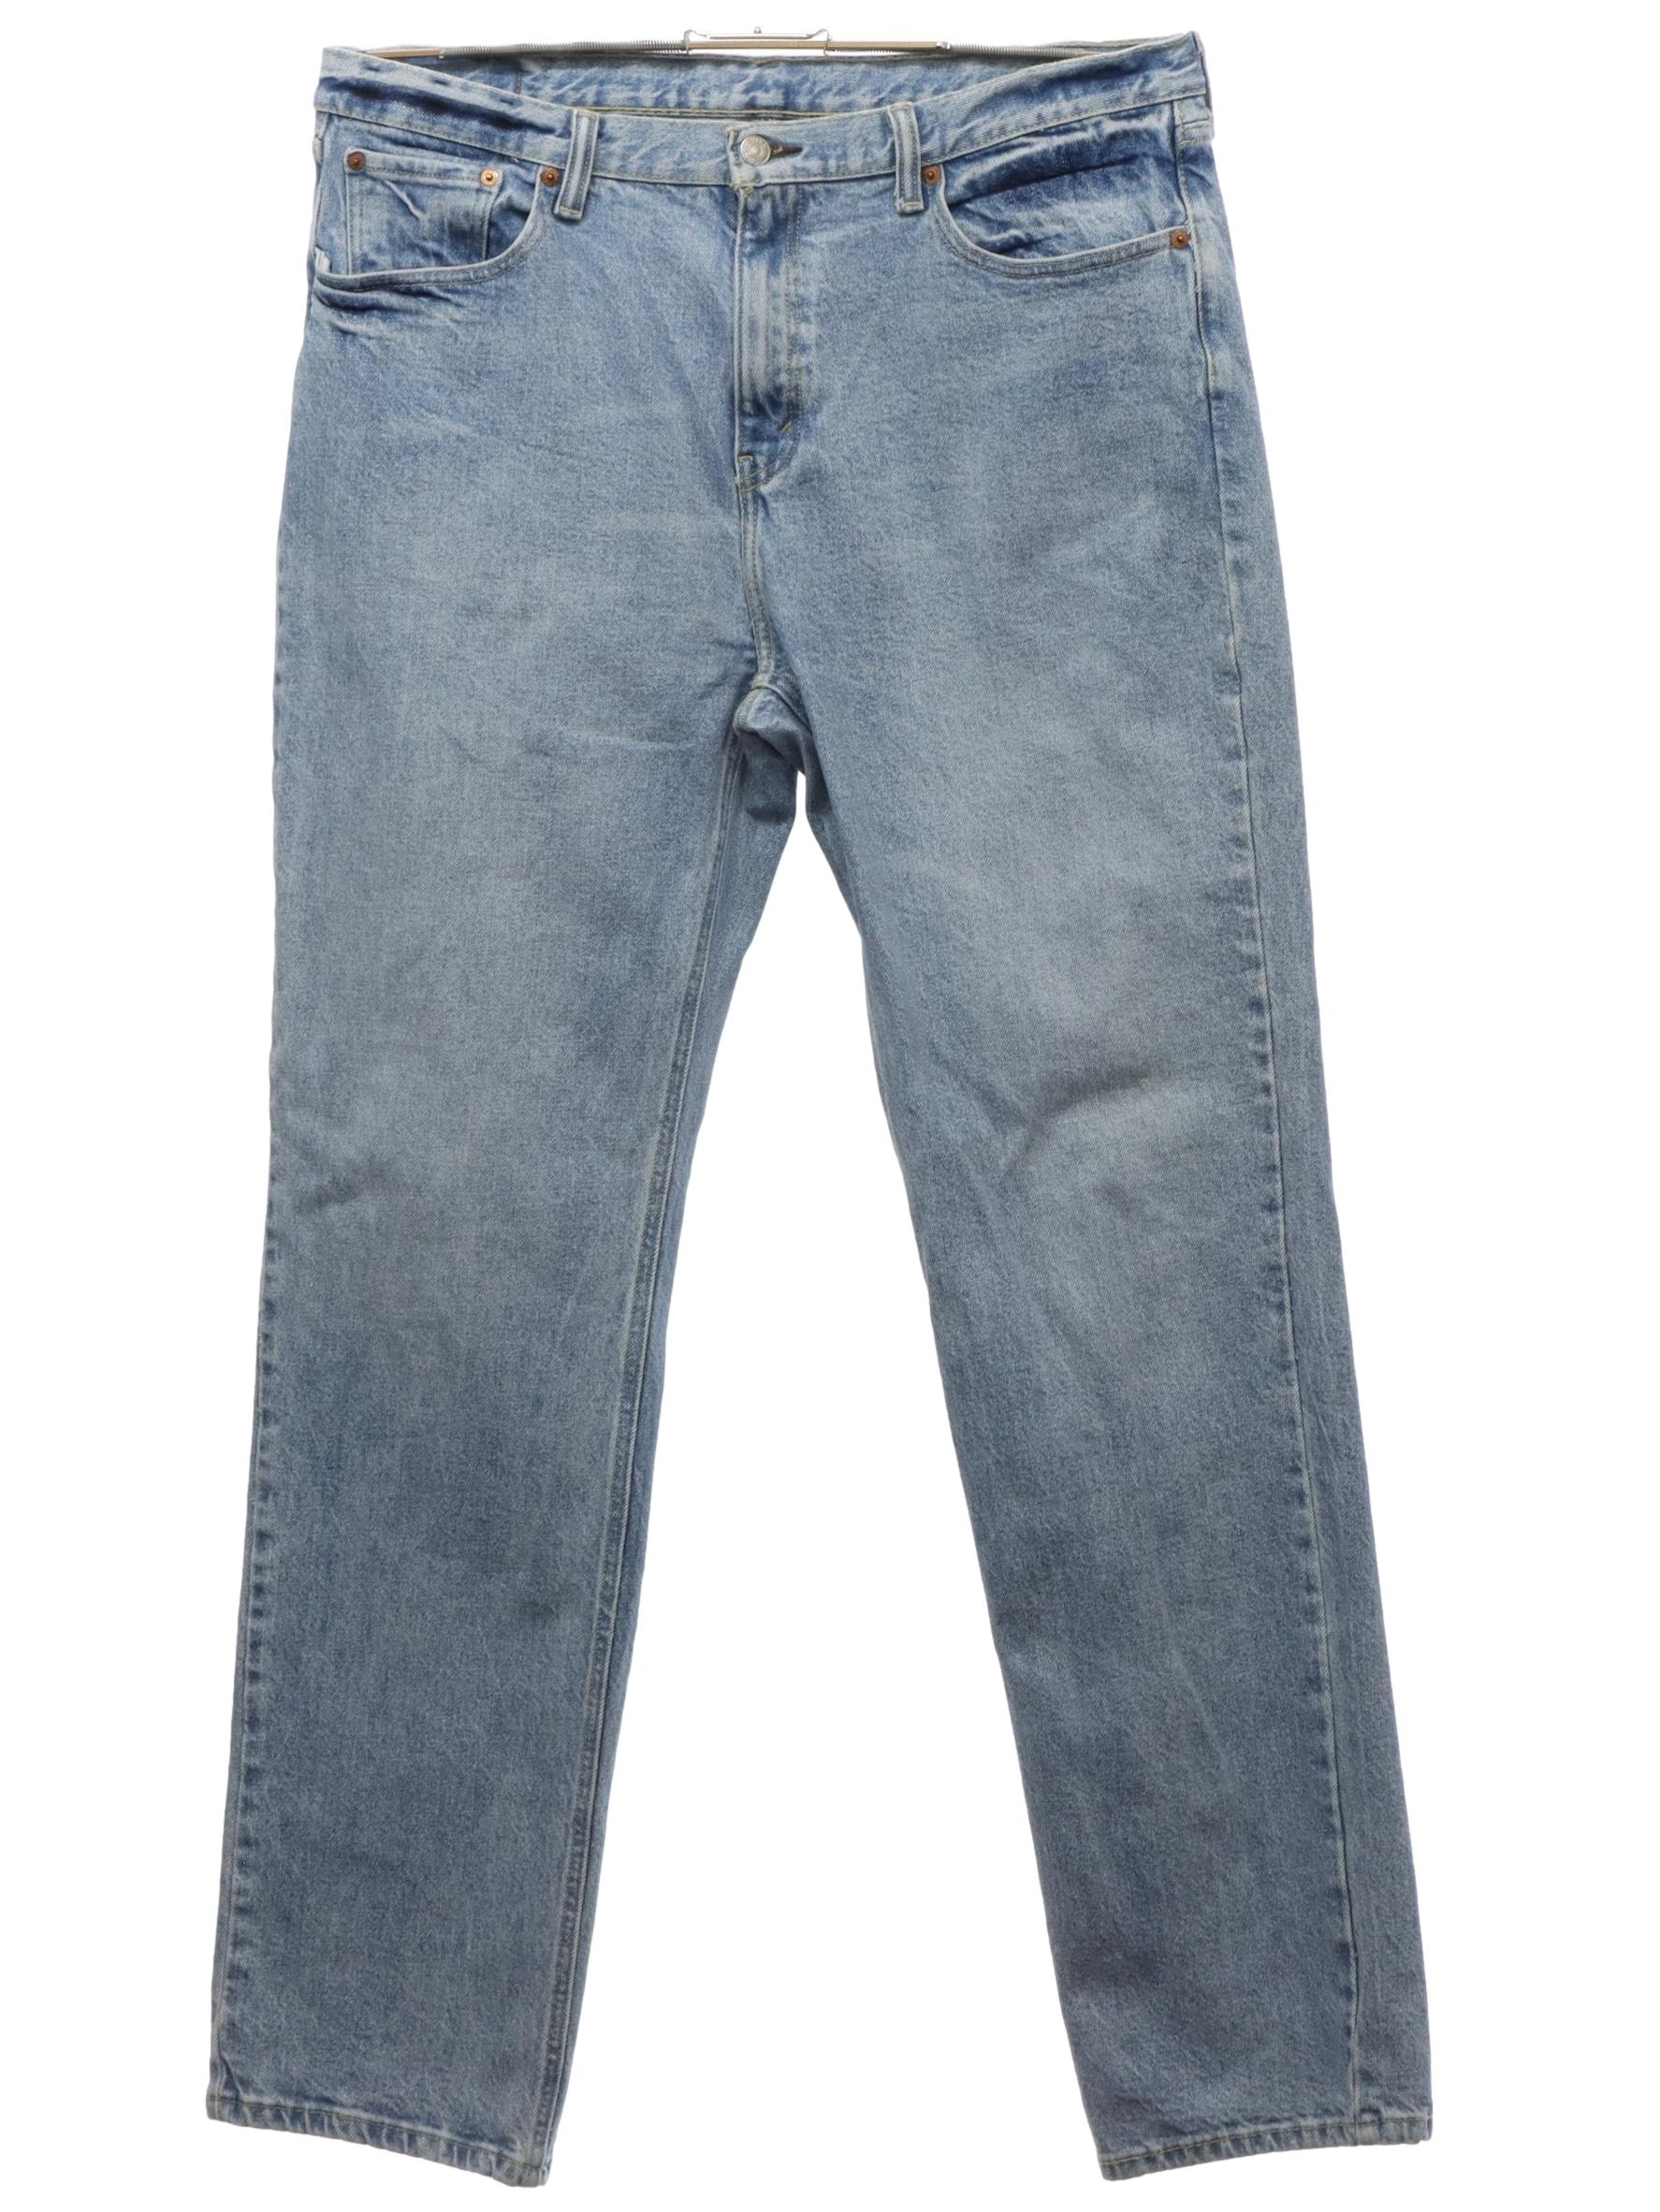 Beskrivelse Veluddannet Omhyggelig læsning Pants: 90s (2018) -Levis 541- Mens light blue wash cotton denim jeans pants  with zipper fly closure with button. Five pocket style - front scoop  pockets with single coin pocket and two